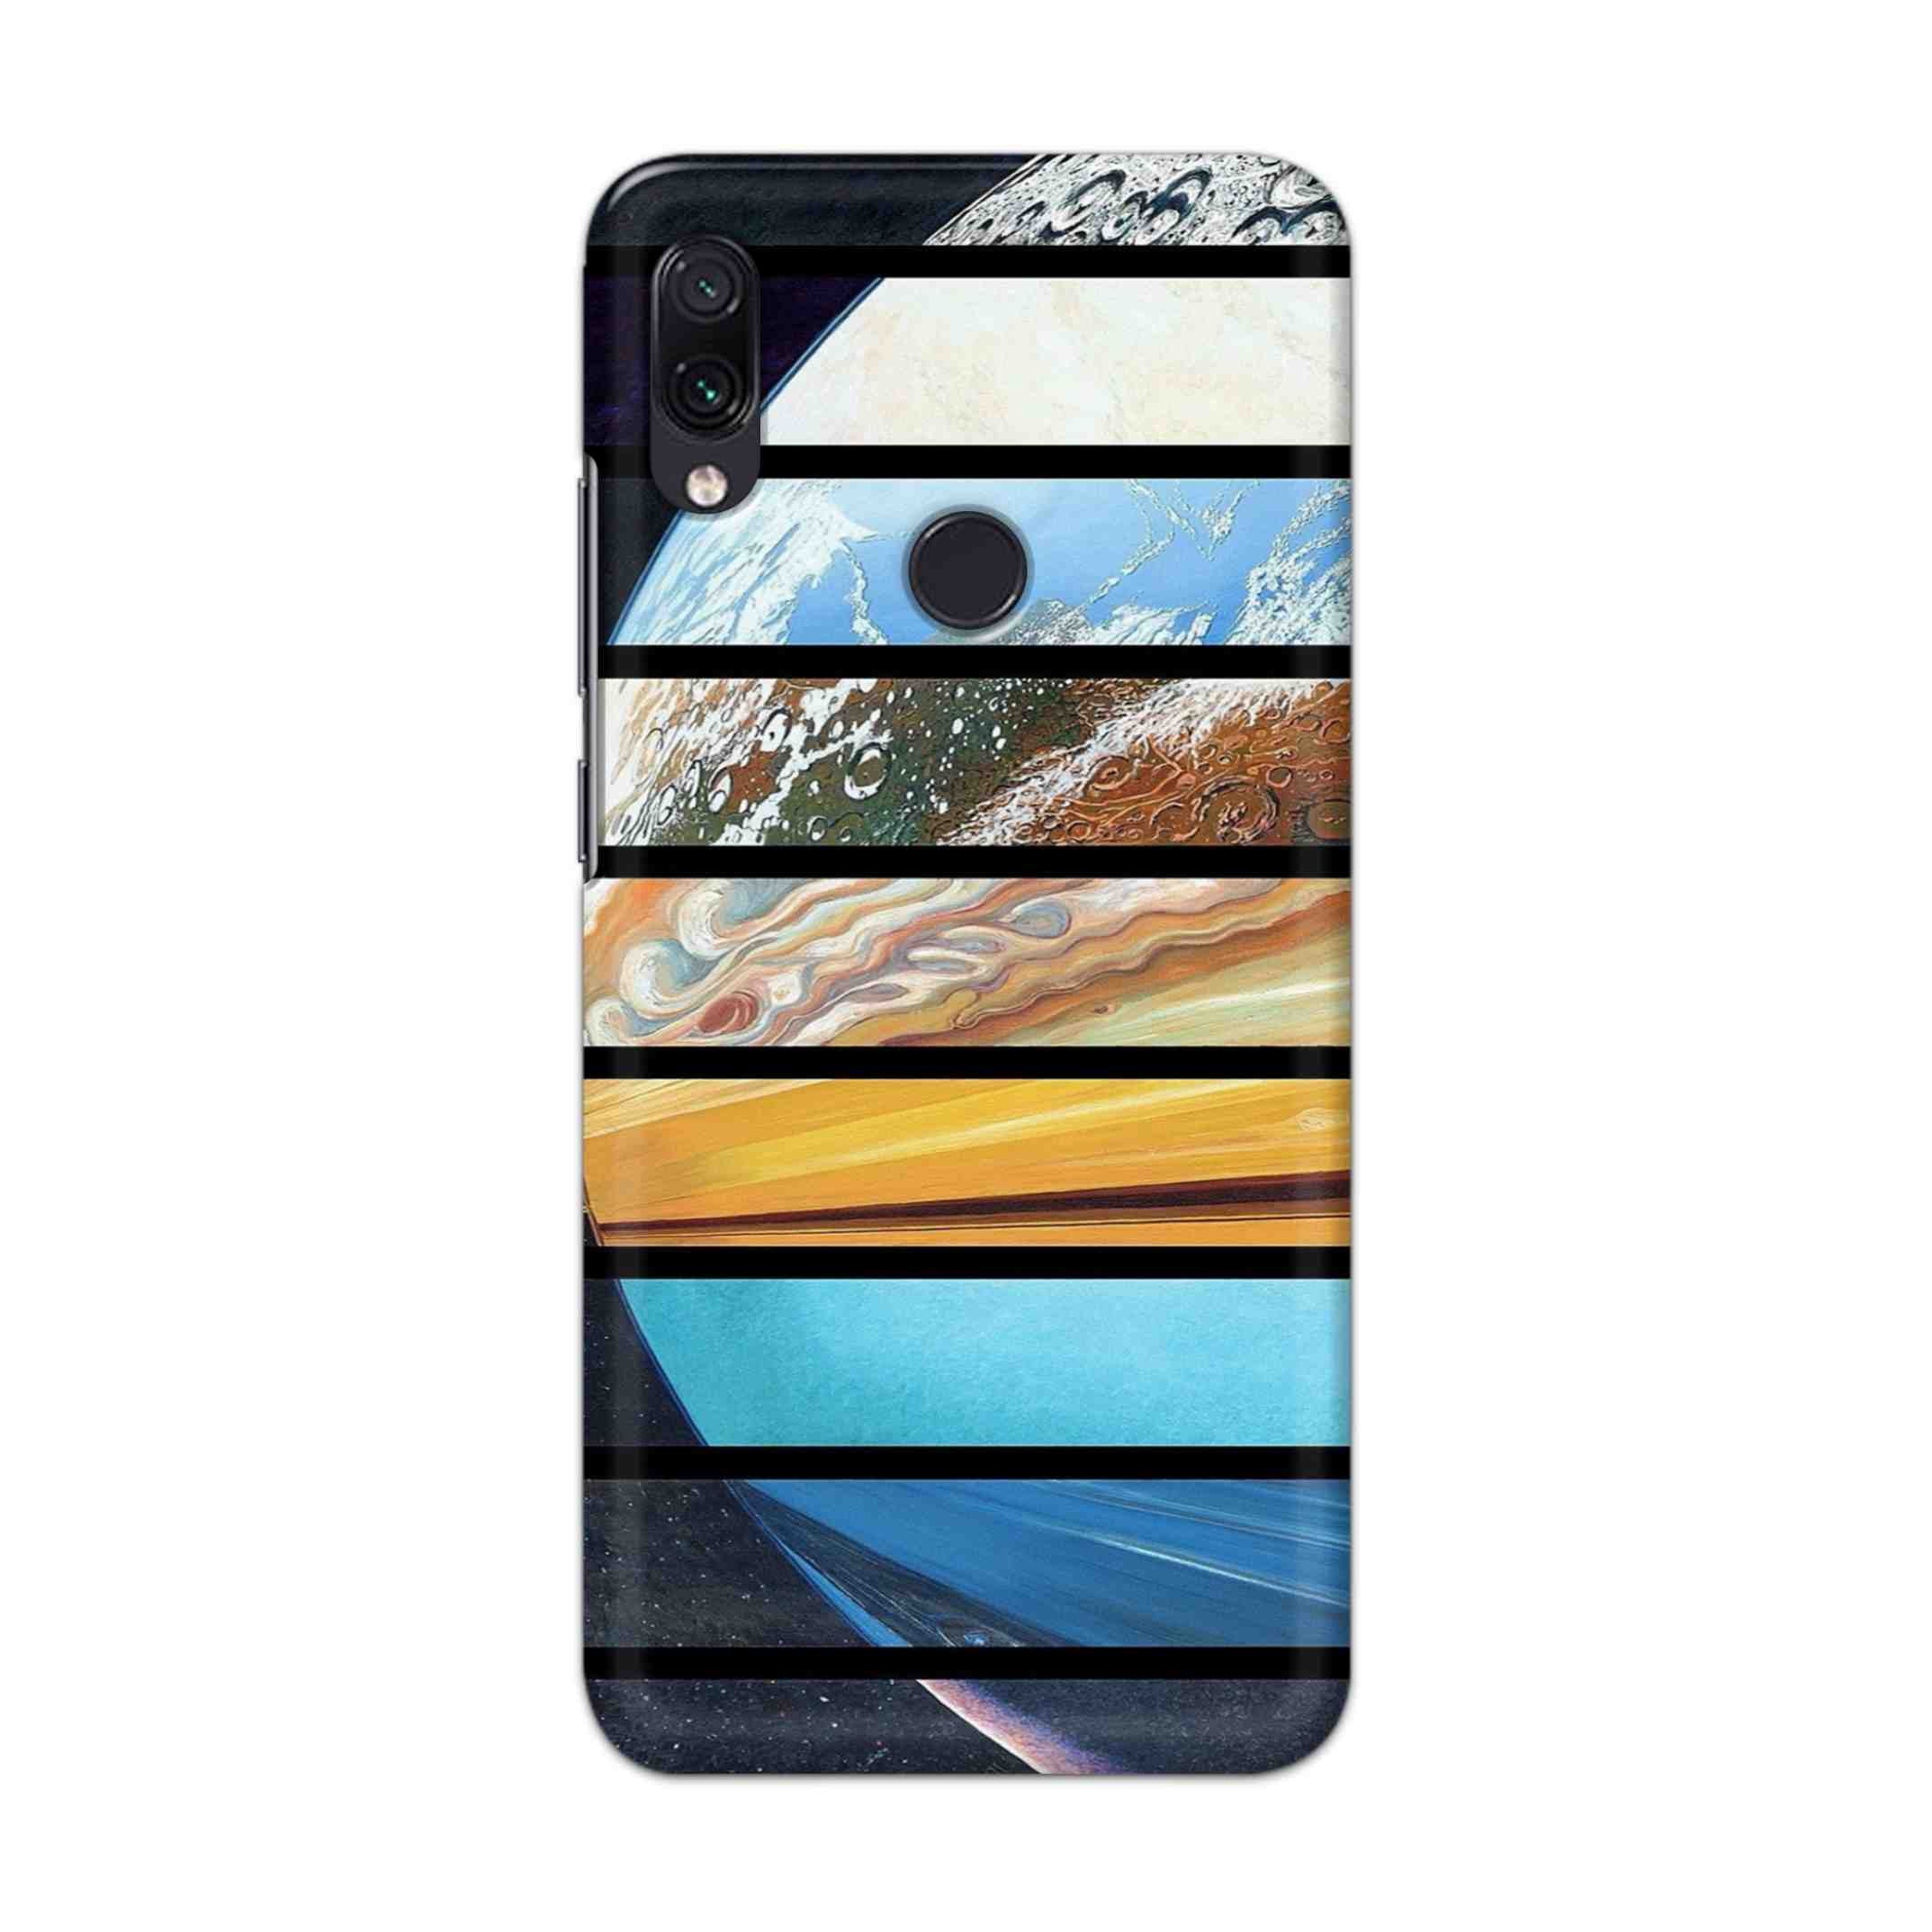 Buy Colourful Earth Hard Back Mobile Phone Case Cover For Redmi Note 7 / Note 7 Pro Online